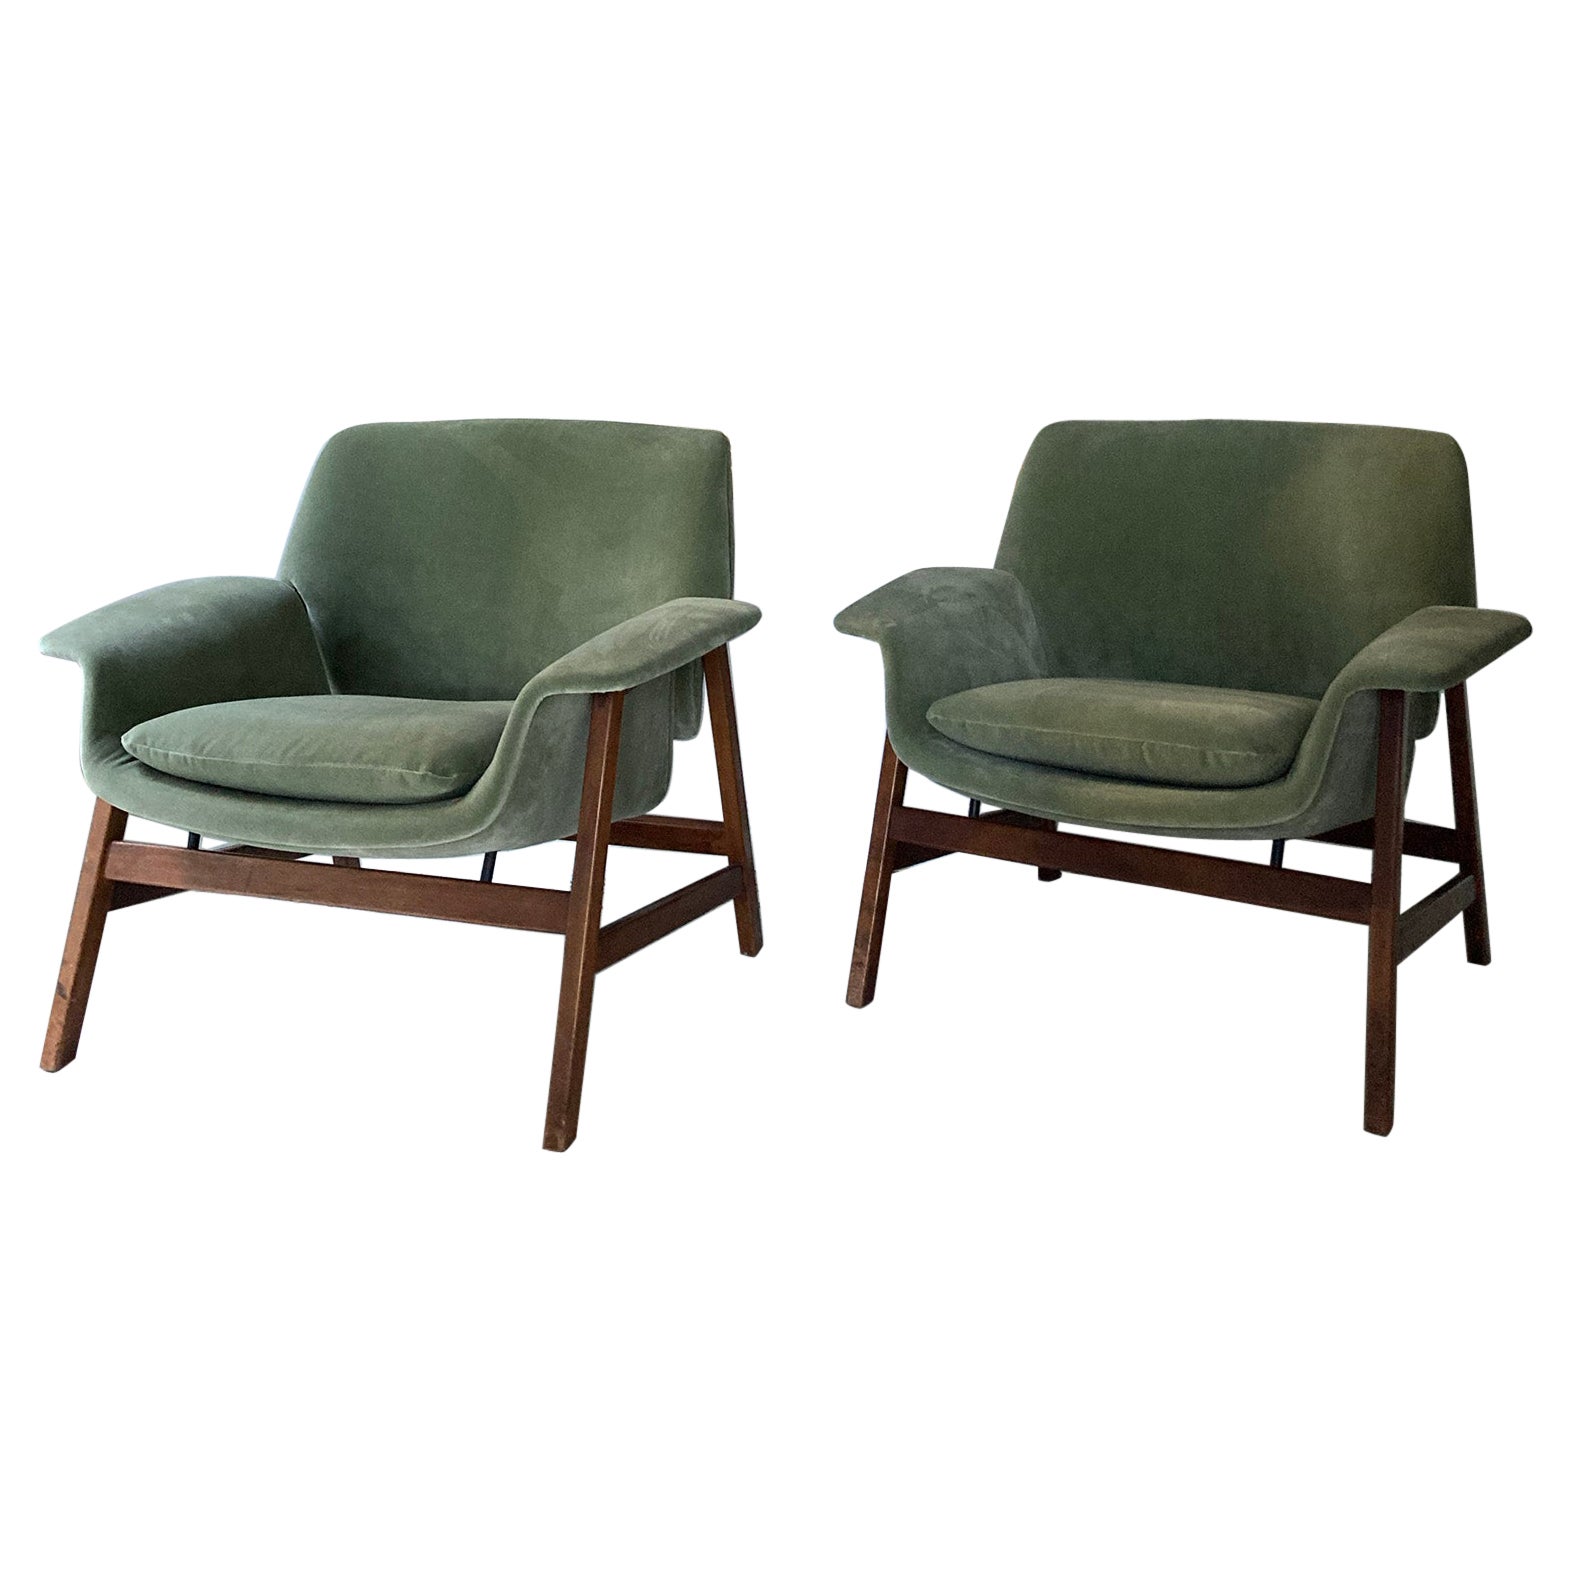 Mid Century Couple of G. Frattini Green Armchairs Mod.849 for Cassina Italy 1956 For Sale